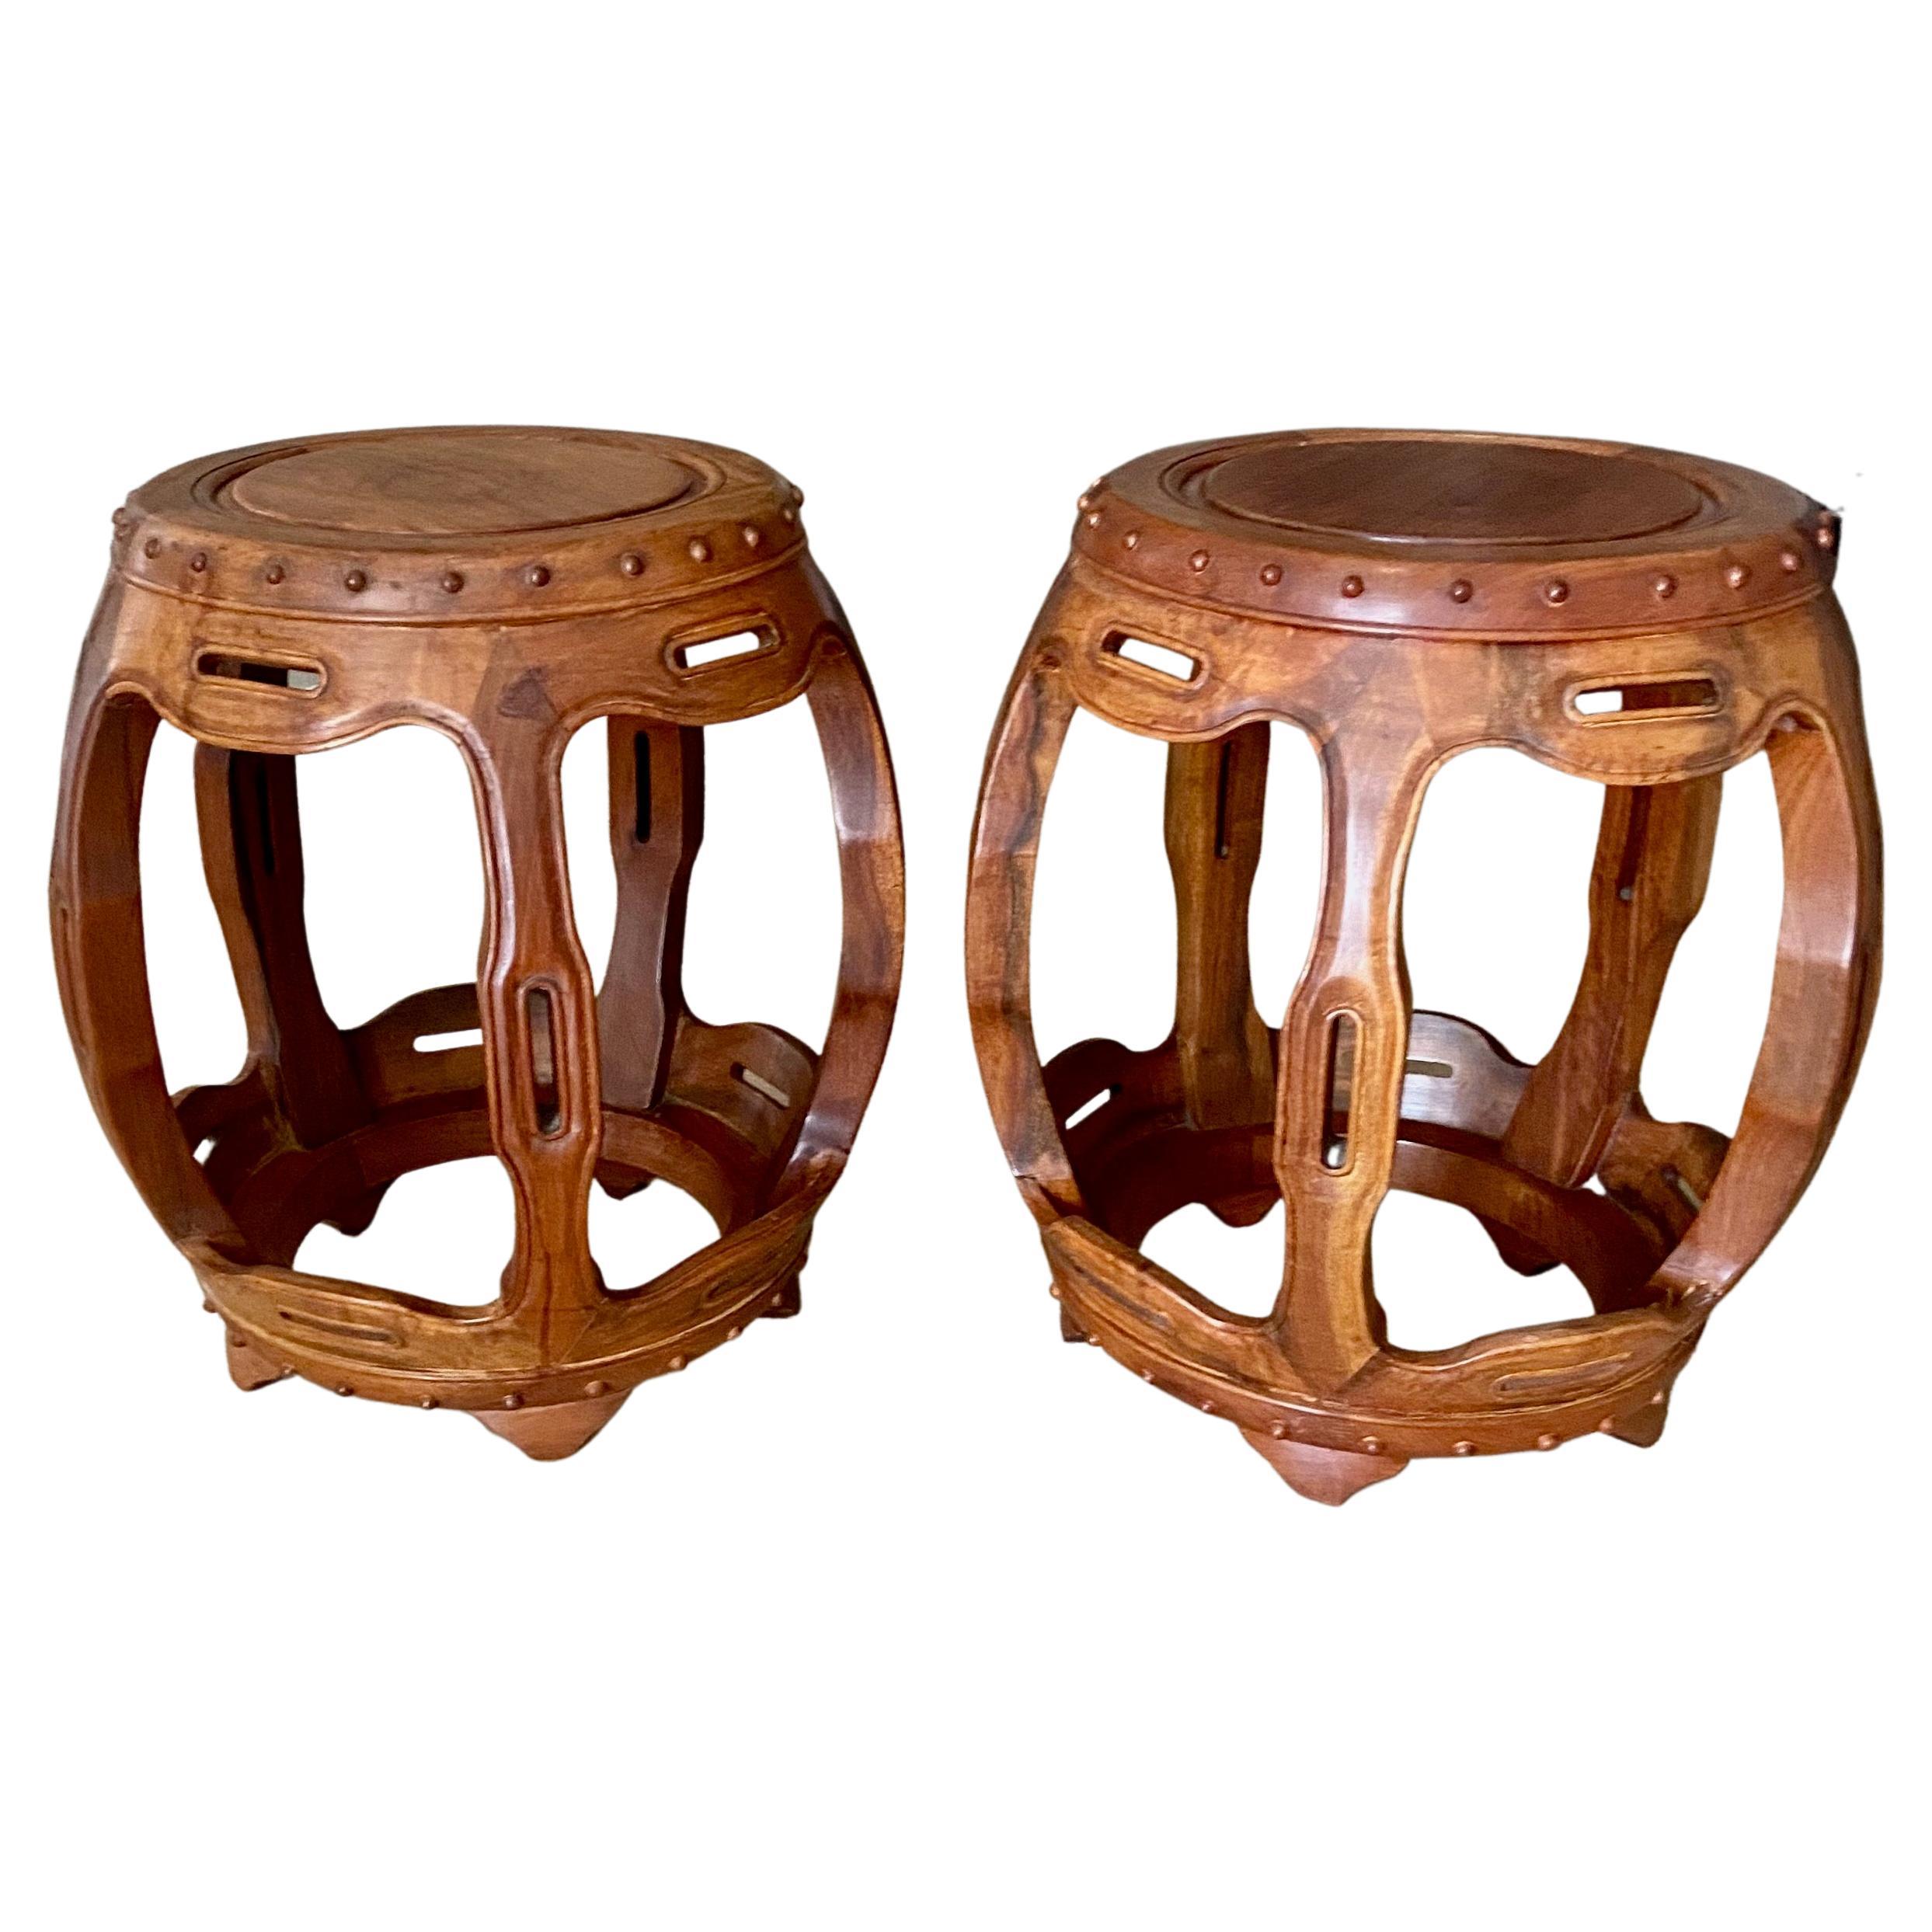 Pair Late Qing Dynasty Chinese Hardwood Garden Seat Stools